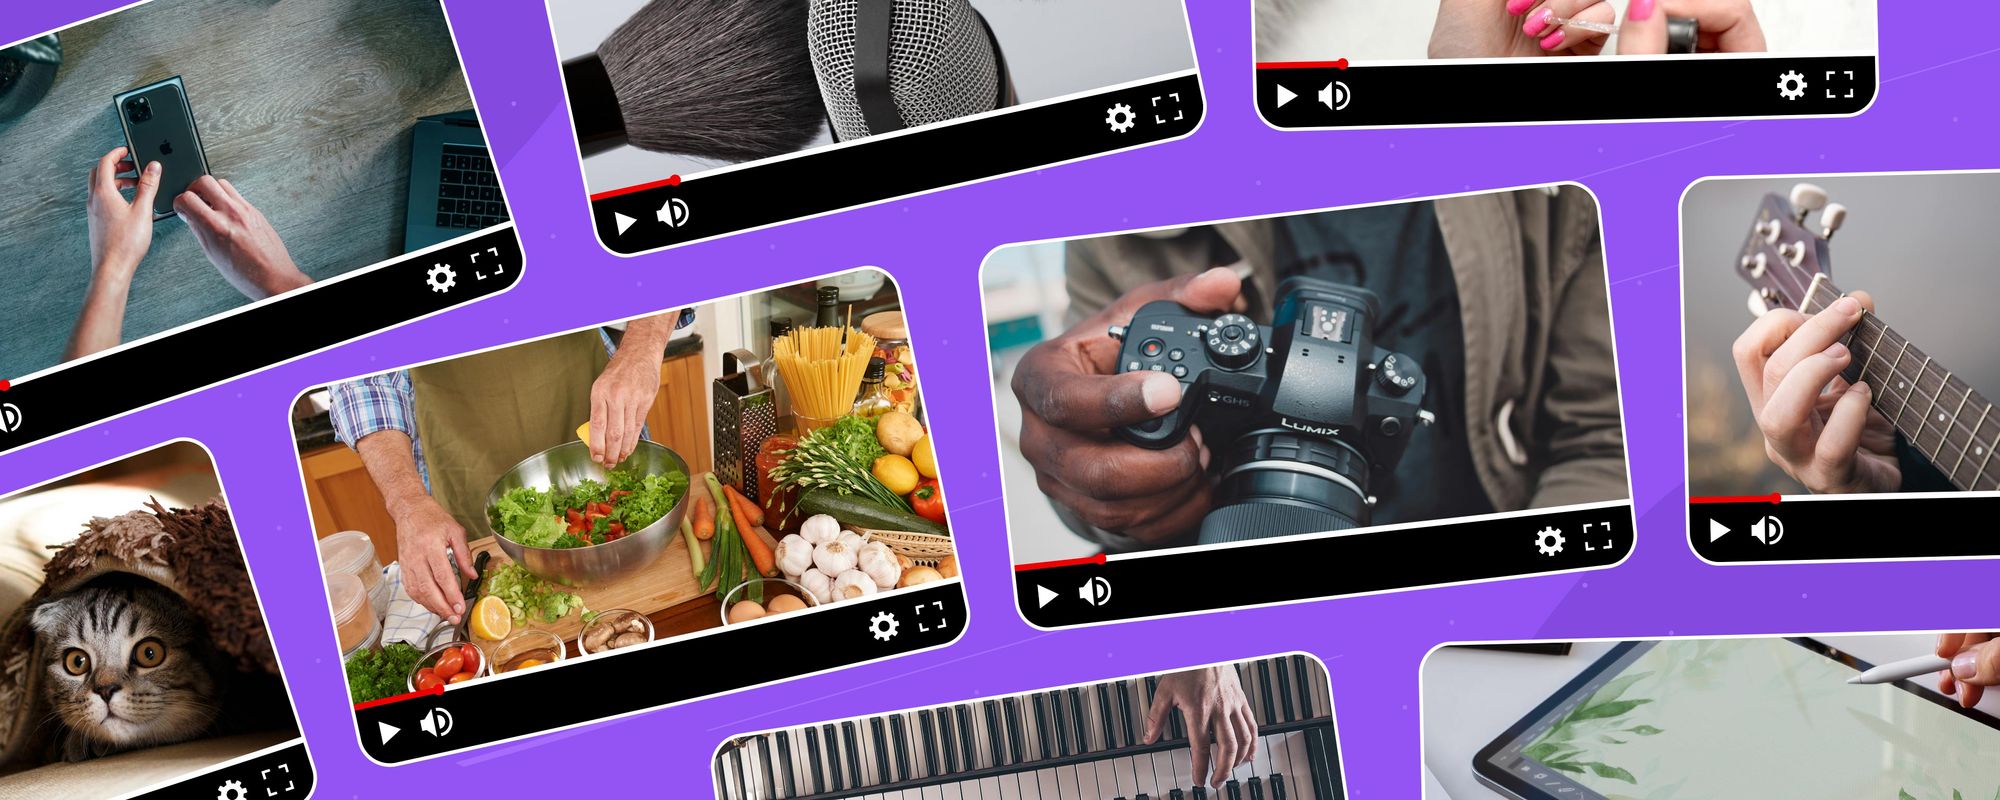 24 faceless YouTube channel ideas to create awesome content without showing your face